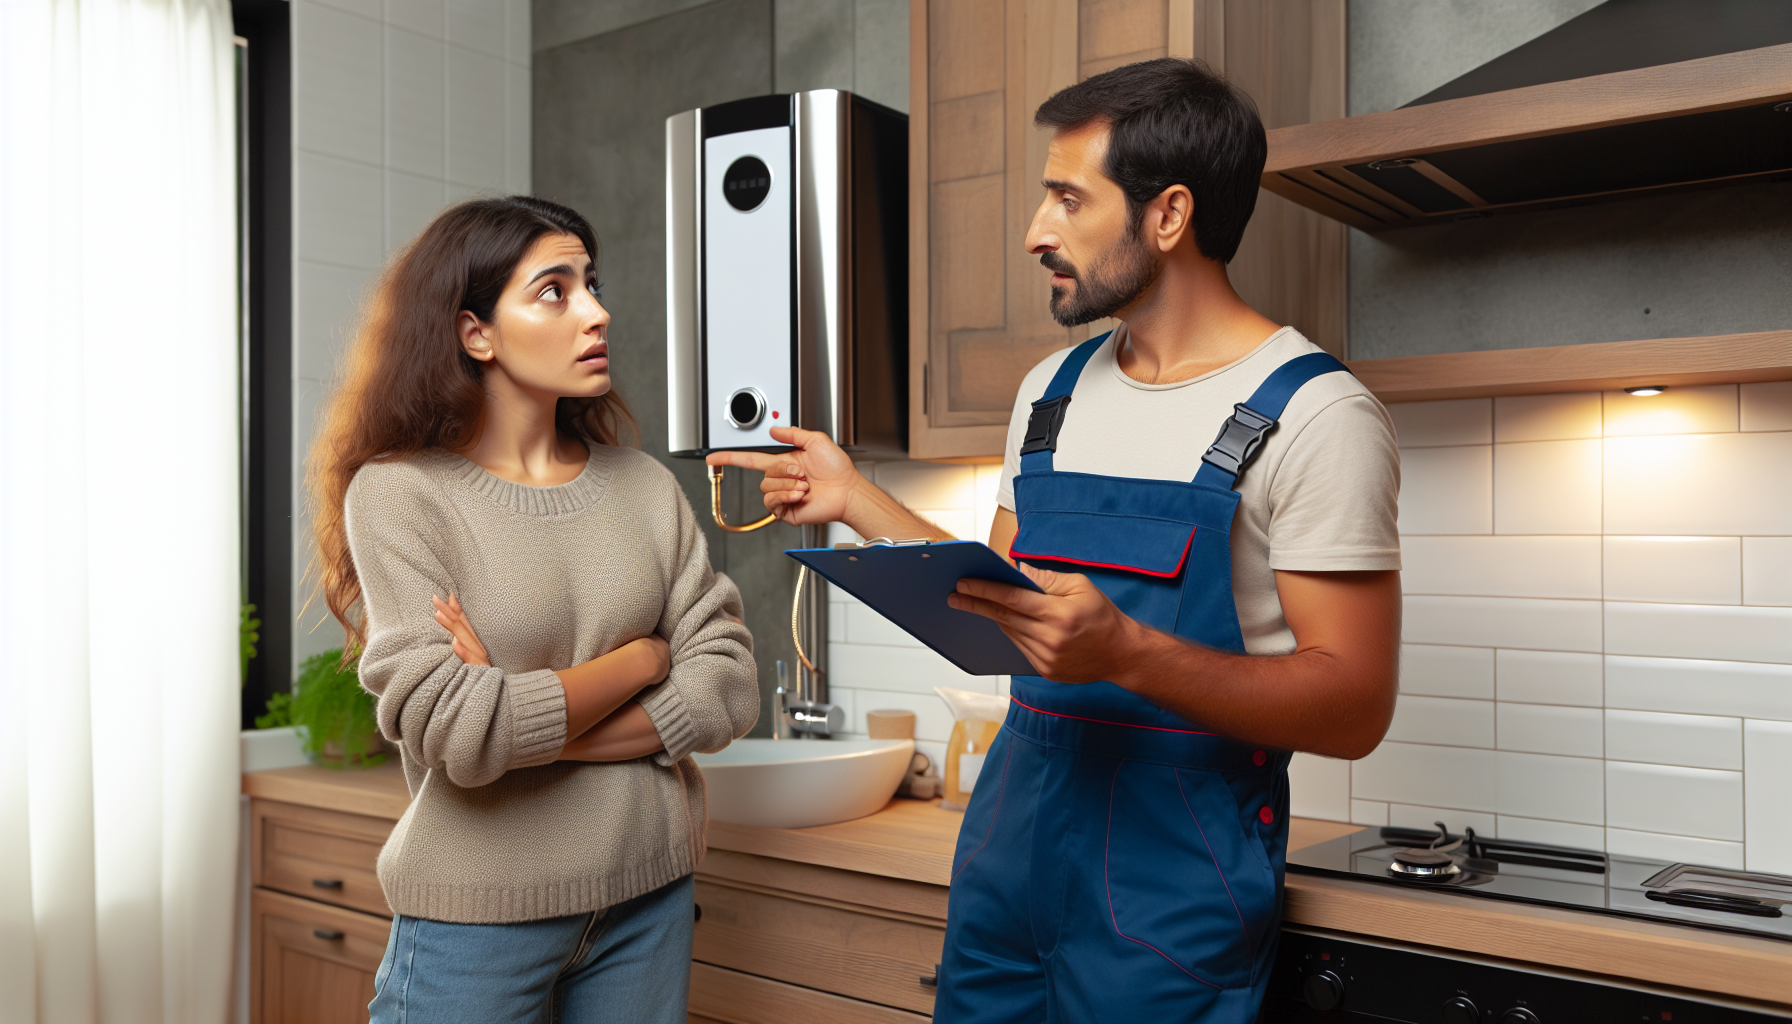 Consulting a professional plumber for guidance on instant gas hot water systems